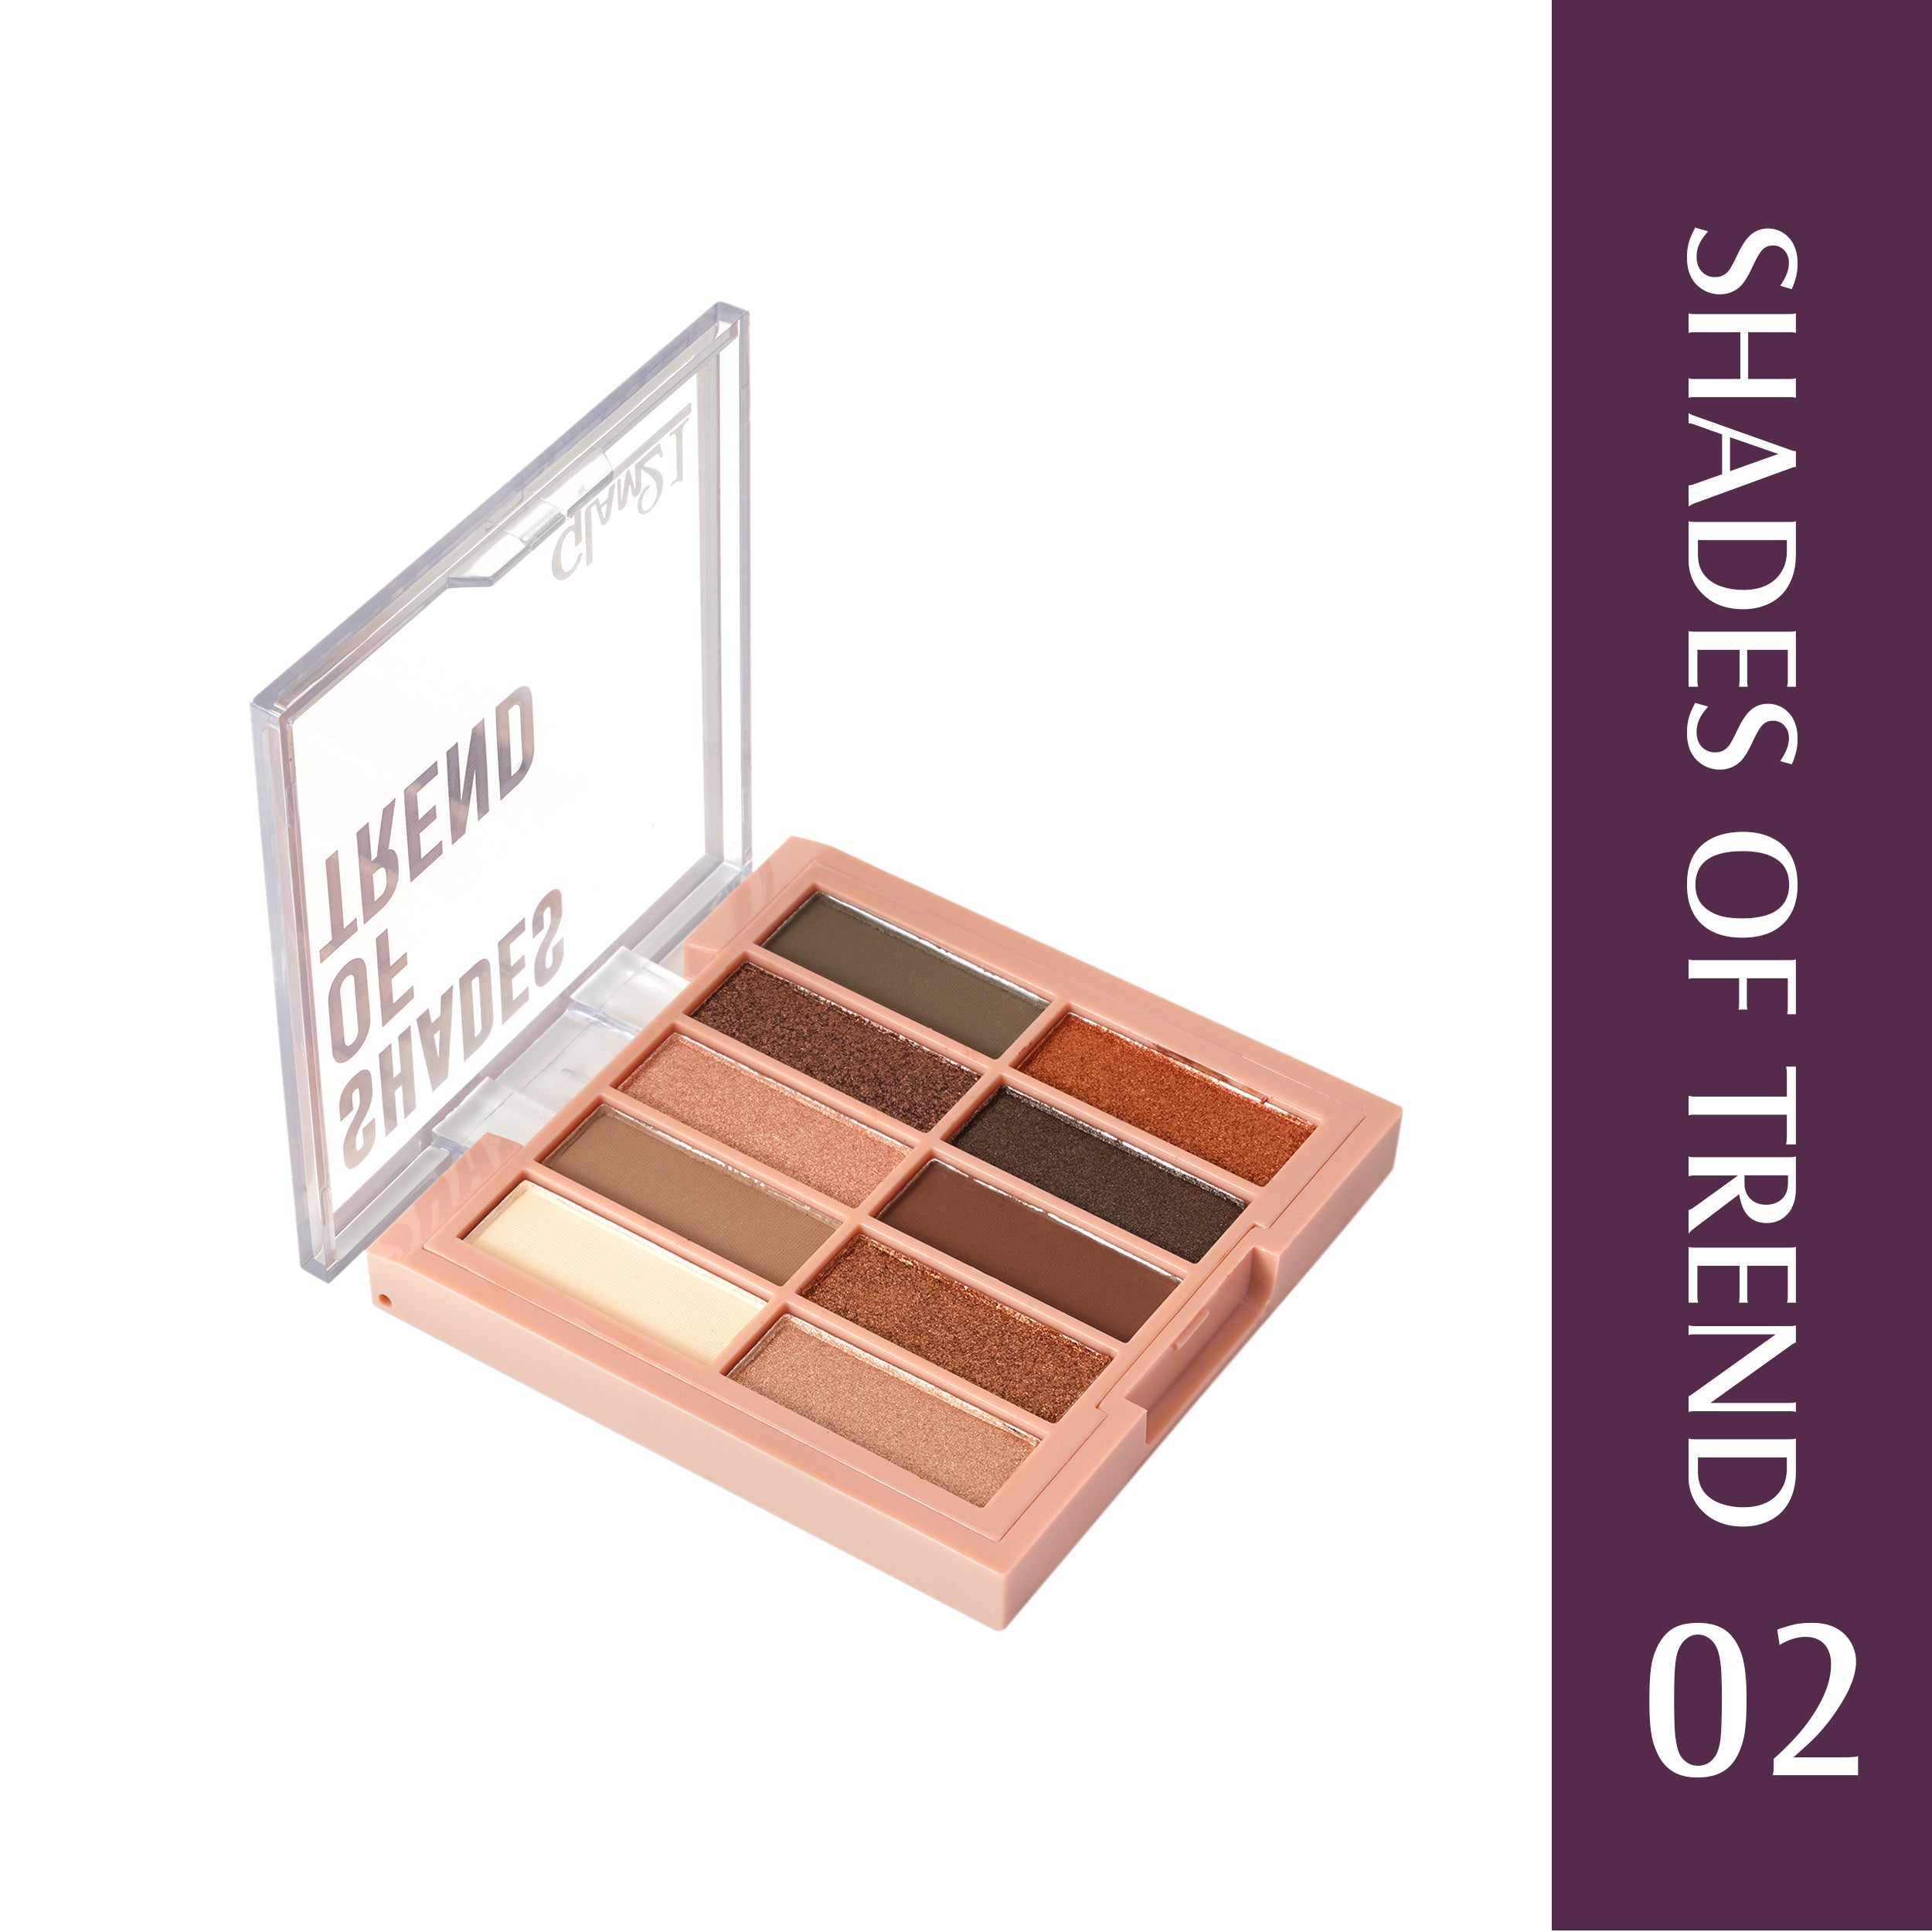 Glam21 Shades of Trend Eyeshadow Palette 10 Highly Pigmented Shades Shimmery Finish, 12gm Shade -02